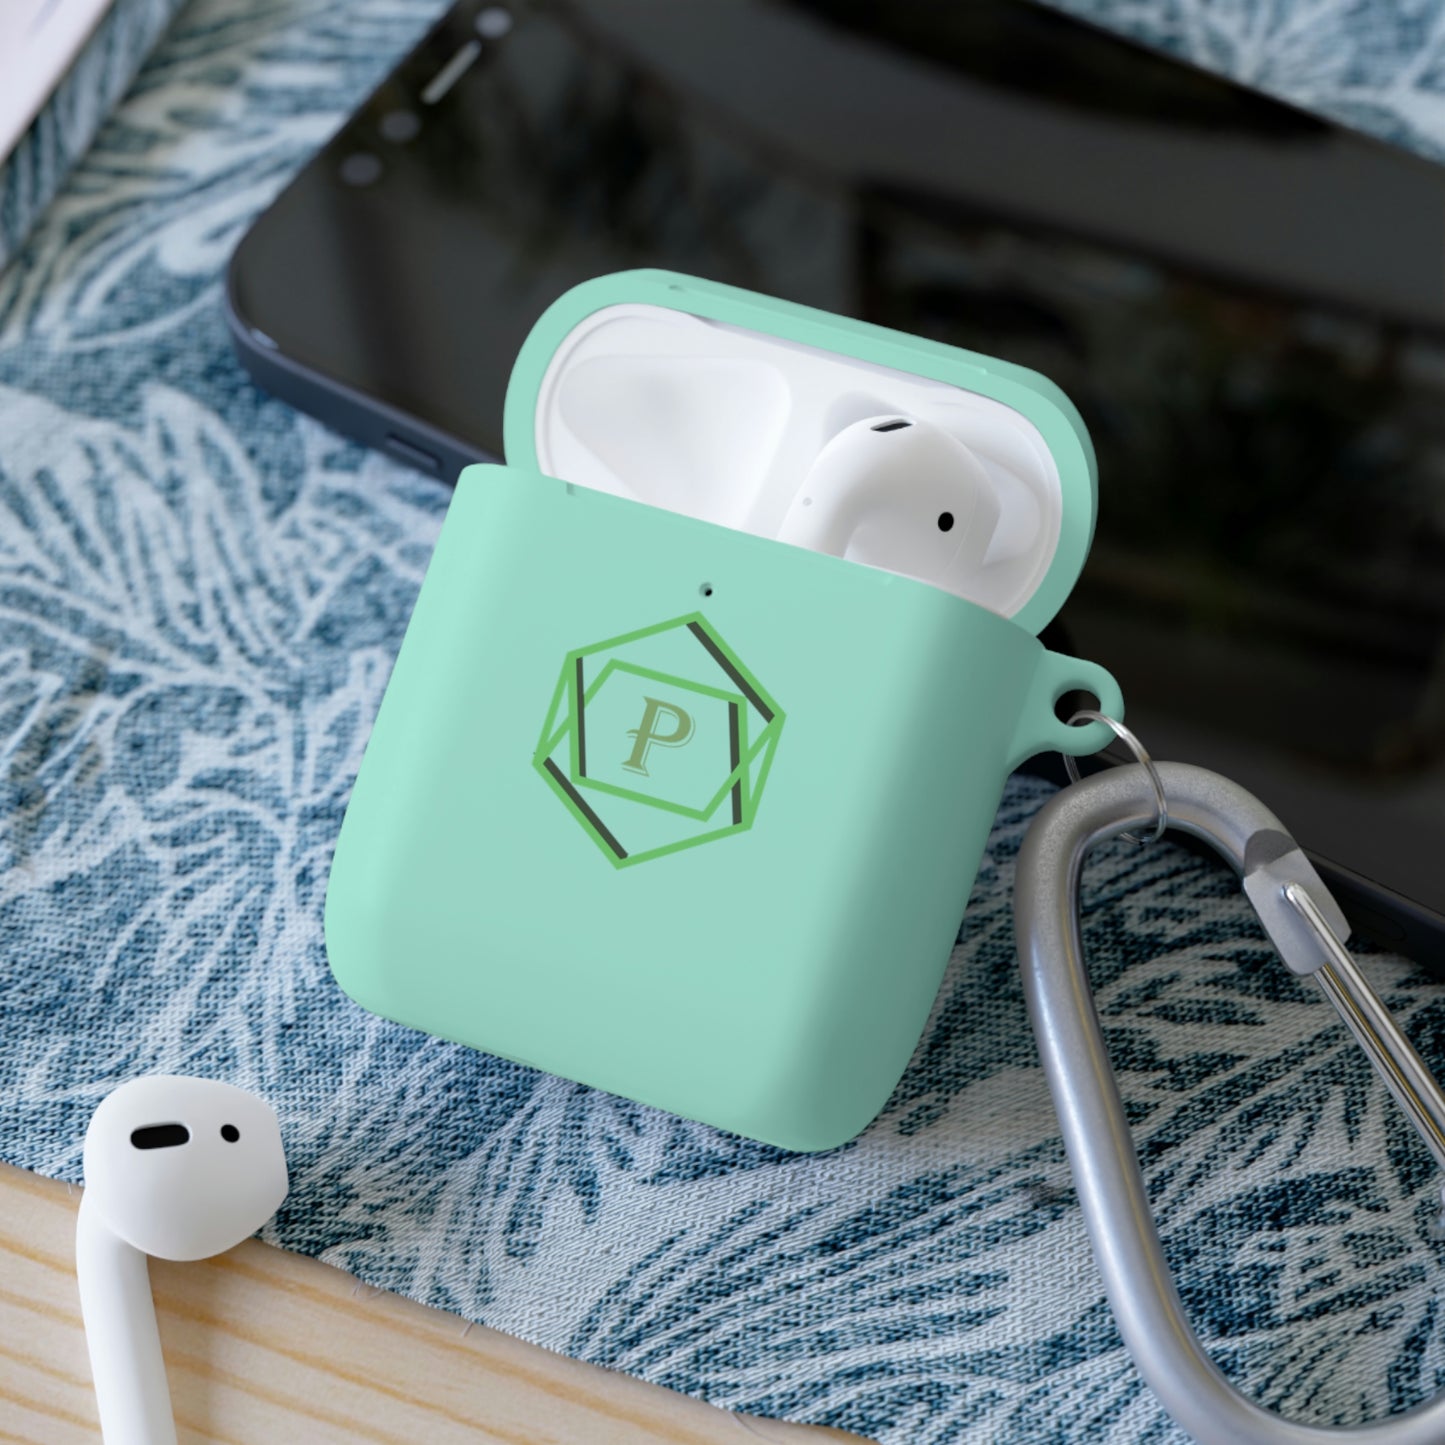 Pypi Coding's AirPods and AirPods Pro Case Cover